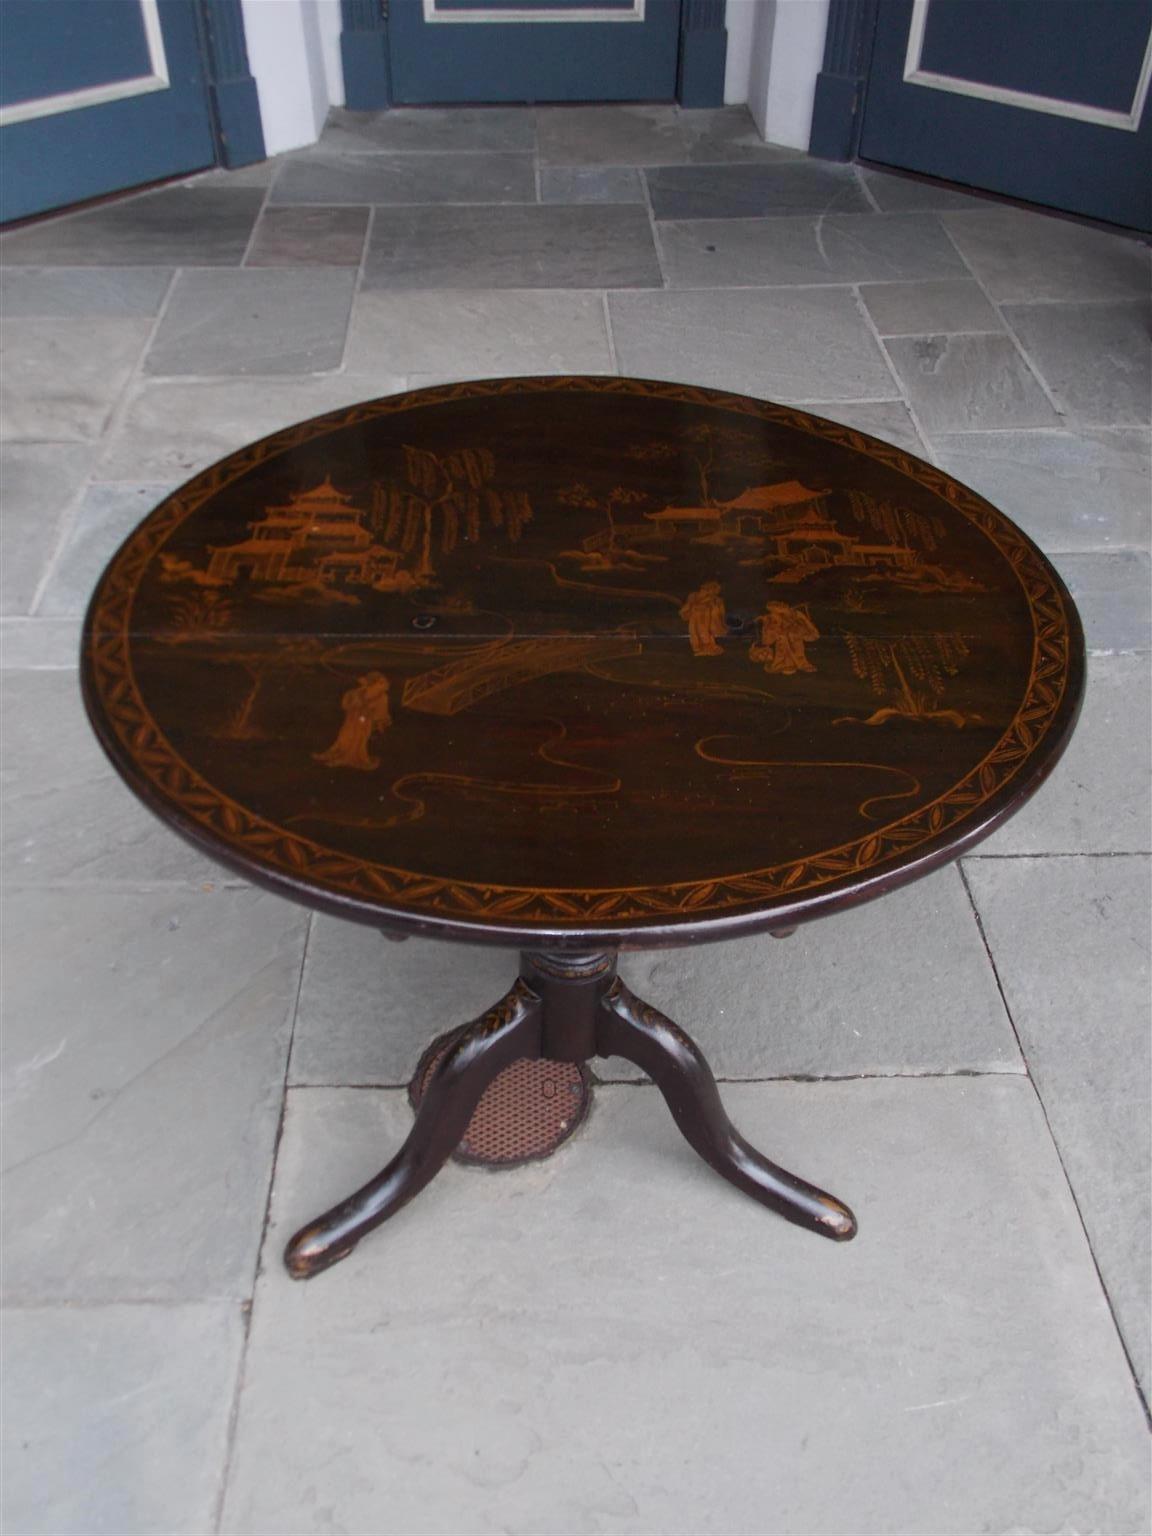 American black lacquer Japanned tilt top table depicting a landscape scene with pagodas in the background, a flowing stream with figures in the foreground, retaining the original locking mechanism and terminating on a turned ringed tripod pedestal